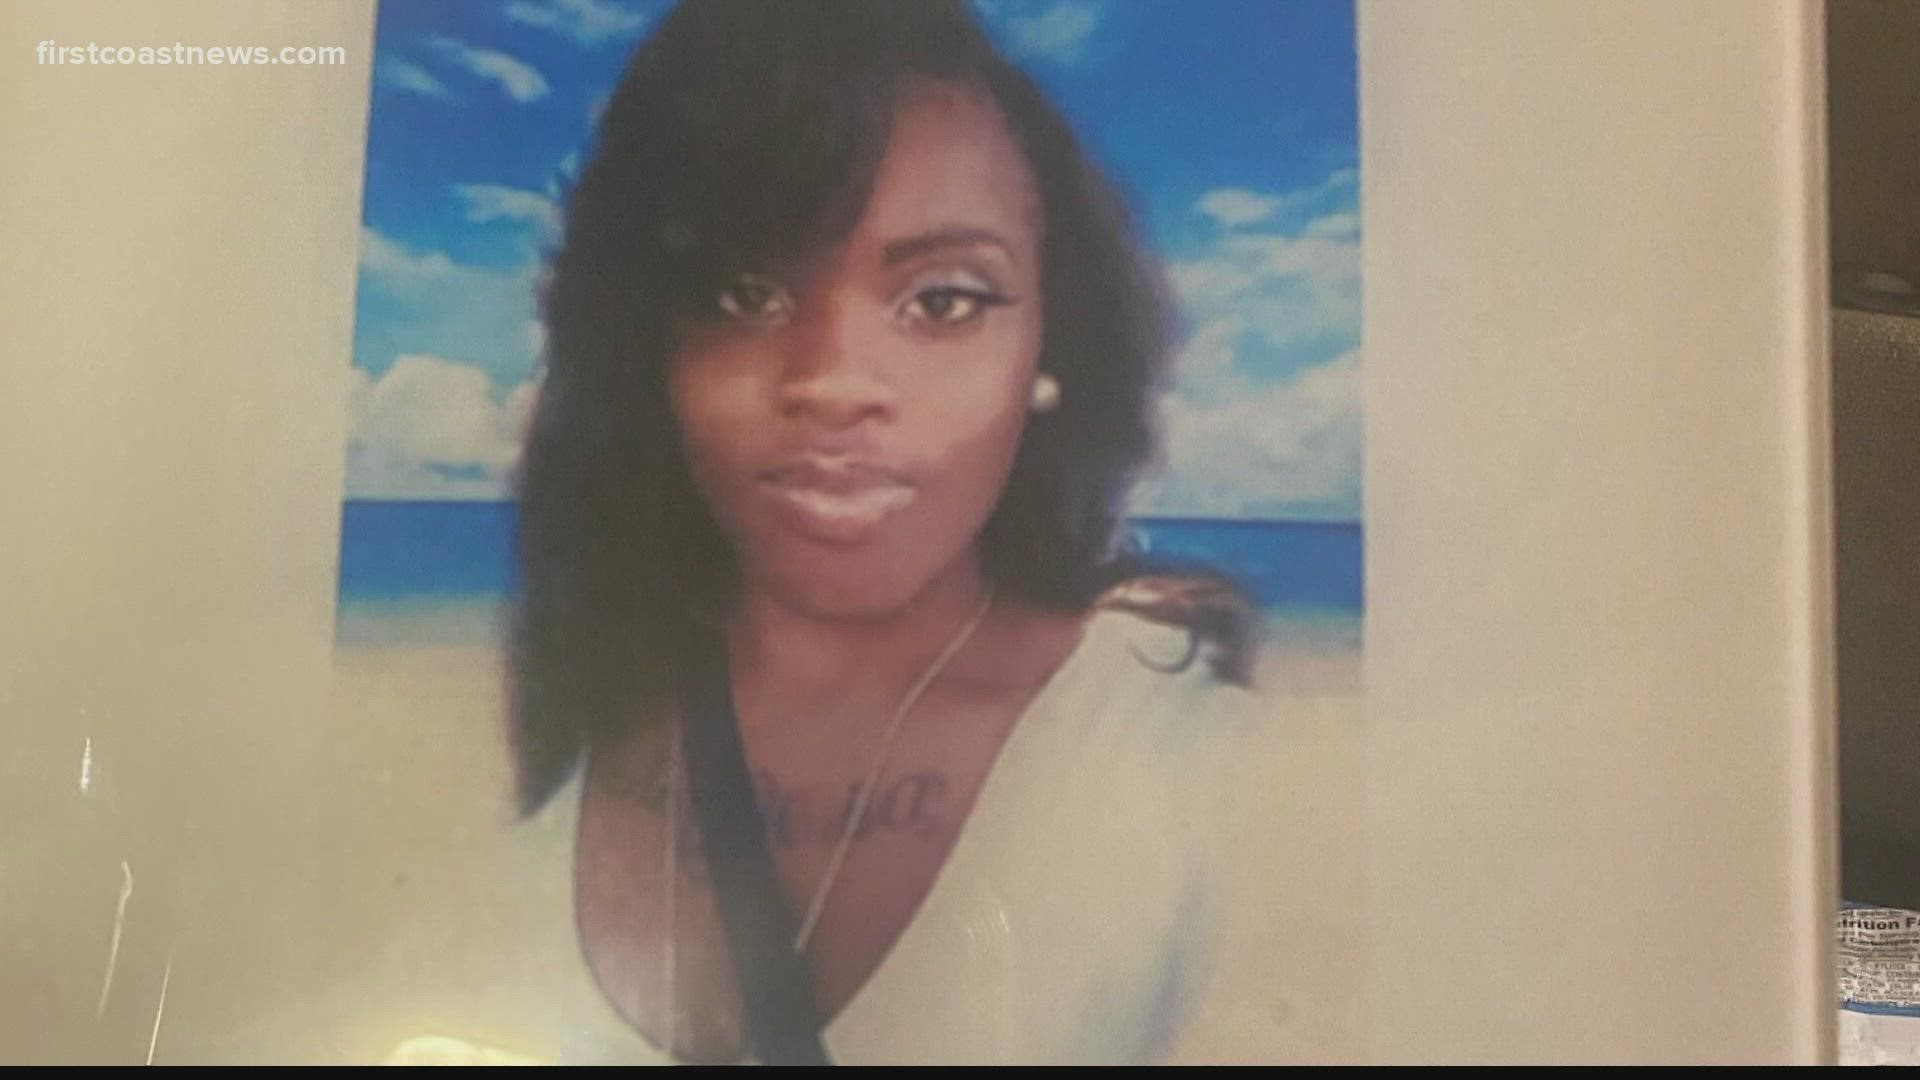 Felicia Jones, 21, was found dead by someone walking in the park early Saturday morning.